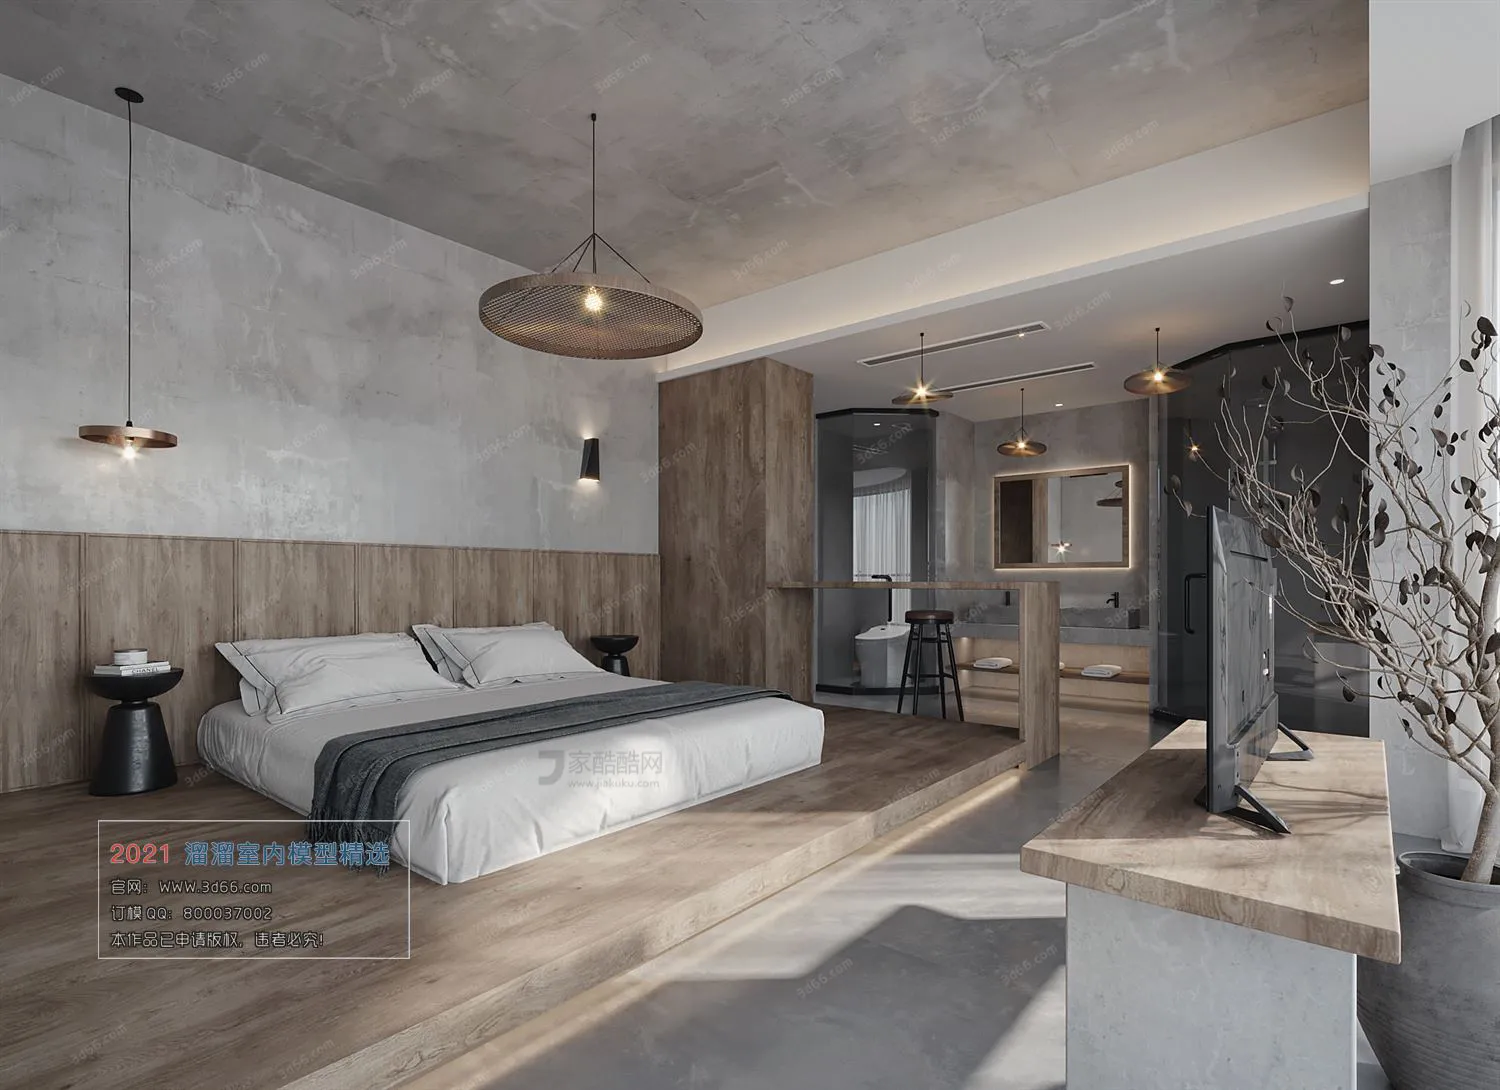 HOTEL SUITE – H001-Industrial style-Corona model